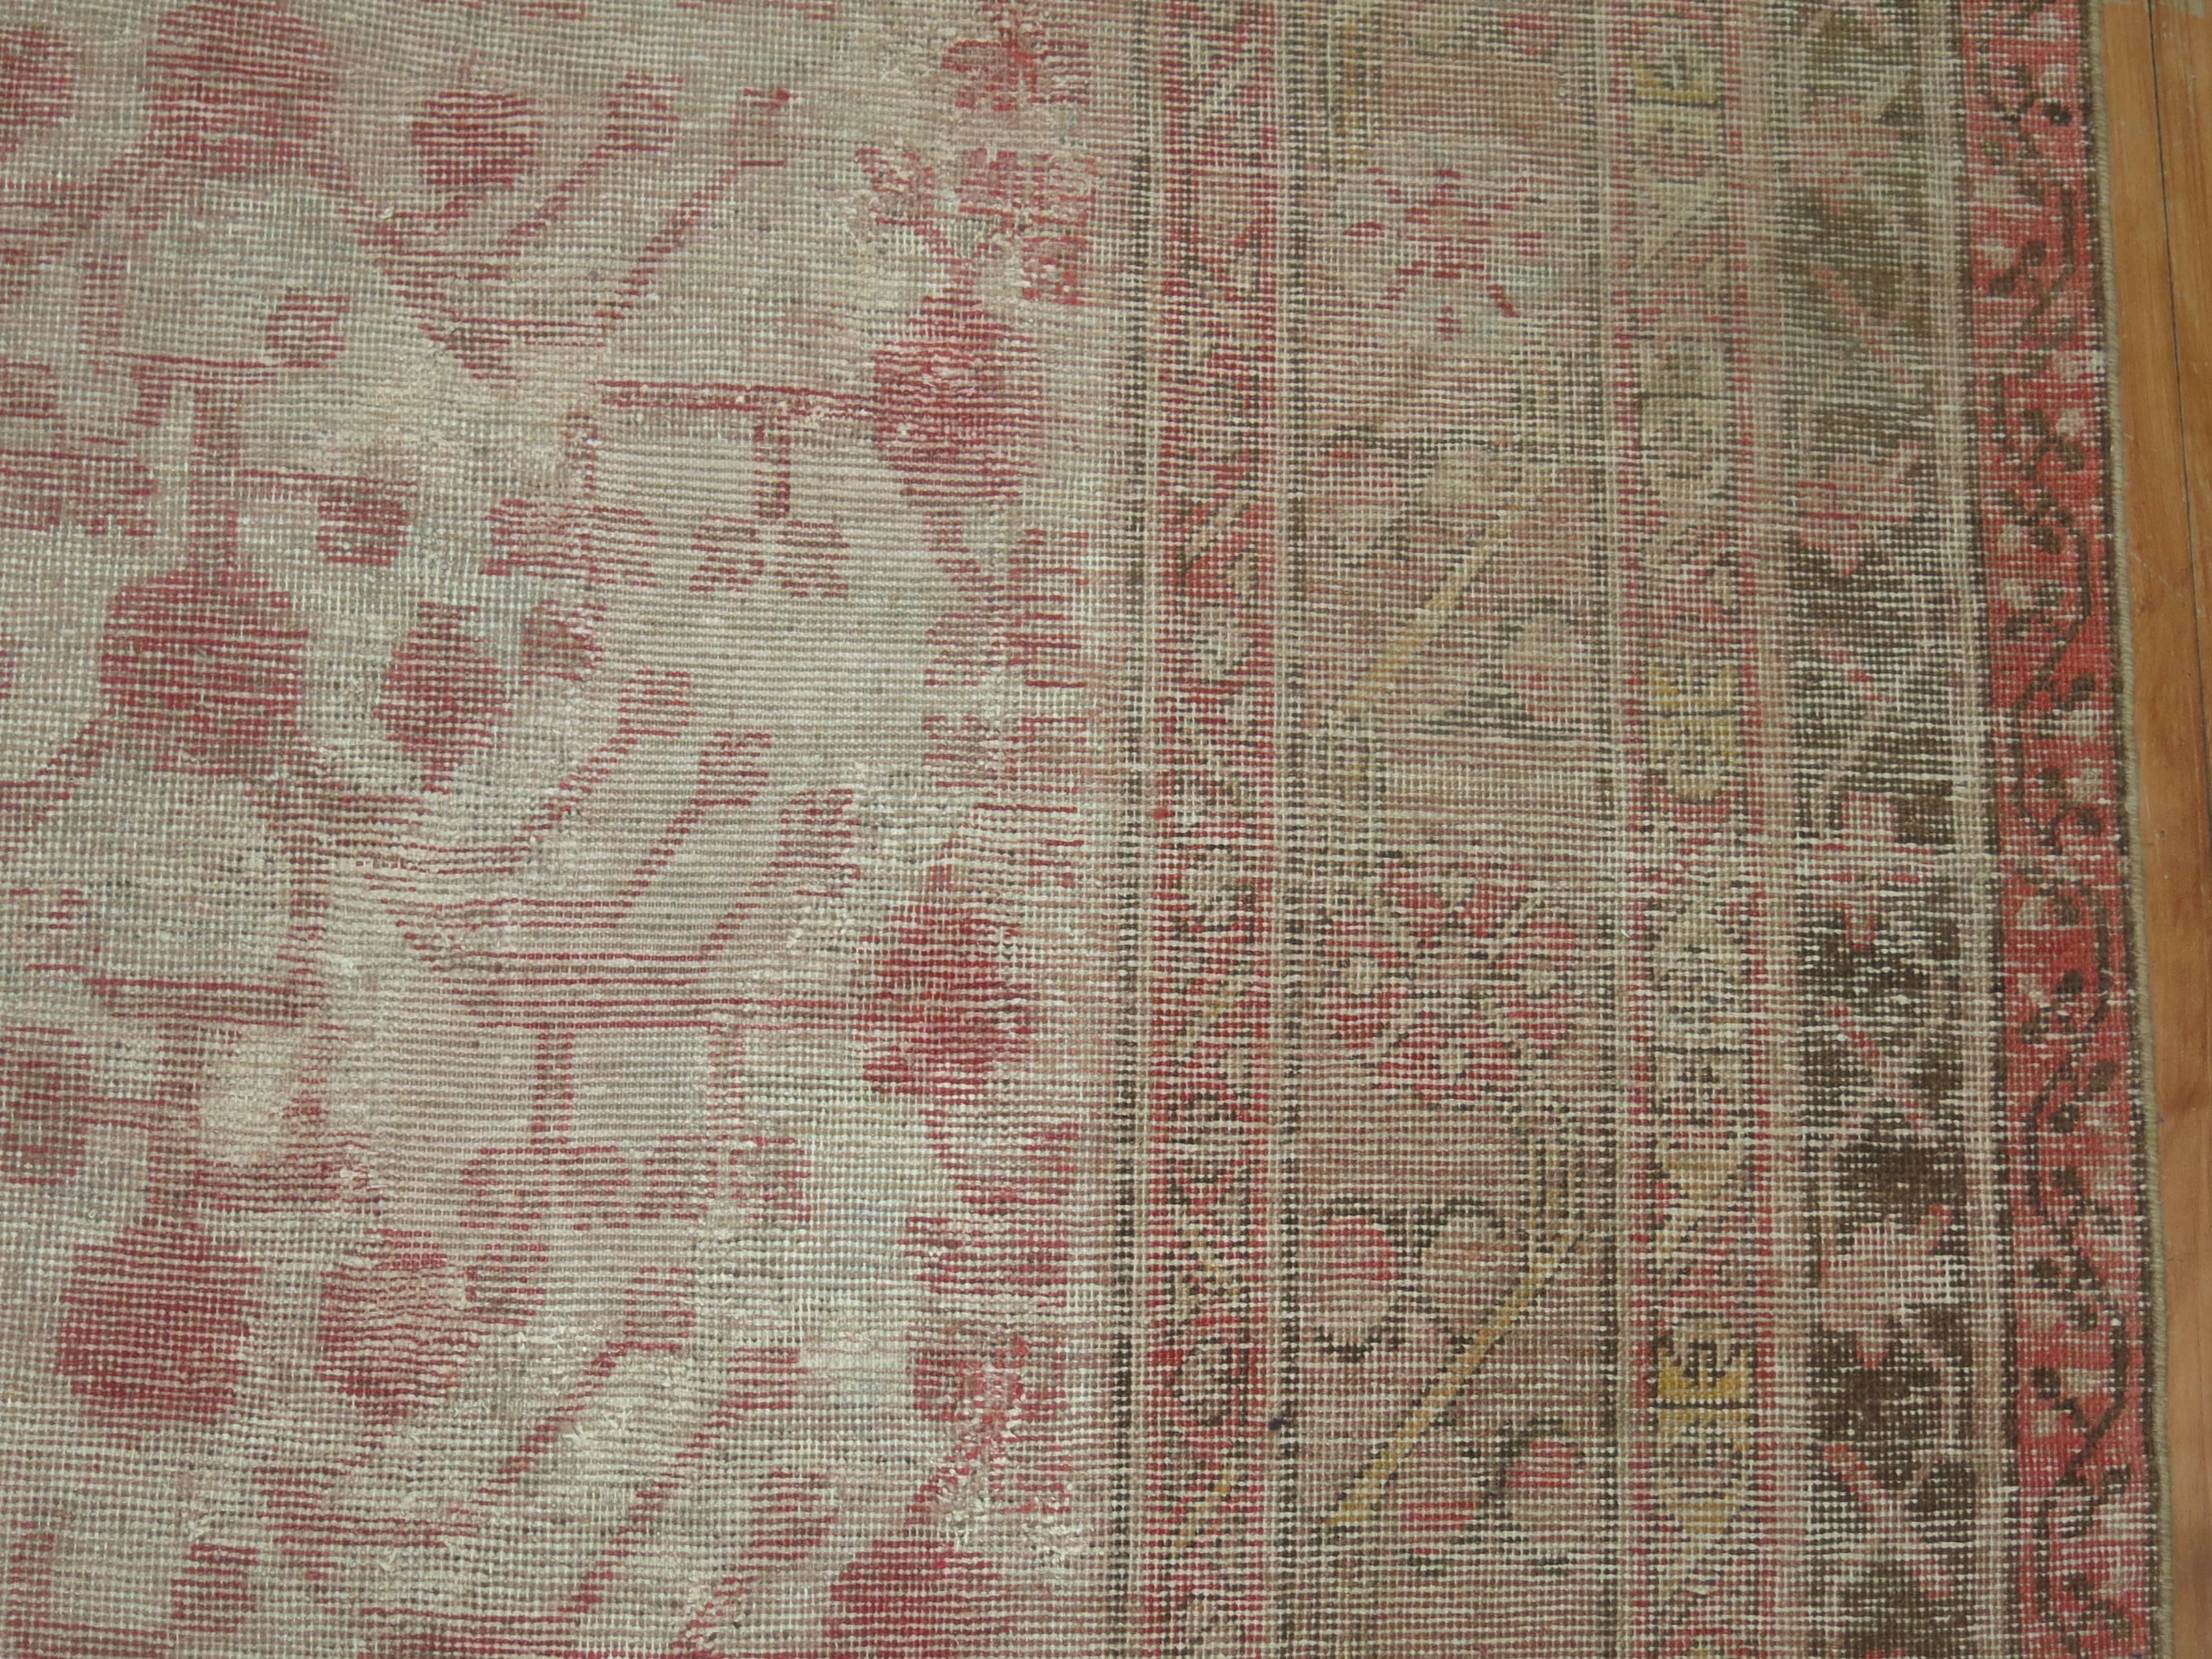 East Turkestani Pomegranate Khotan Shabby Chic Late 19th Century Large Gallery Size Rug For Sale